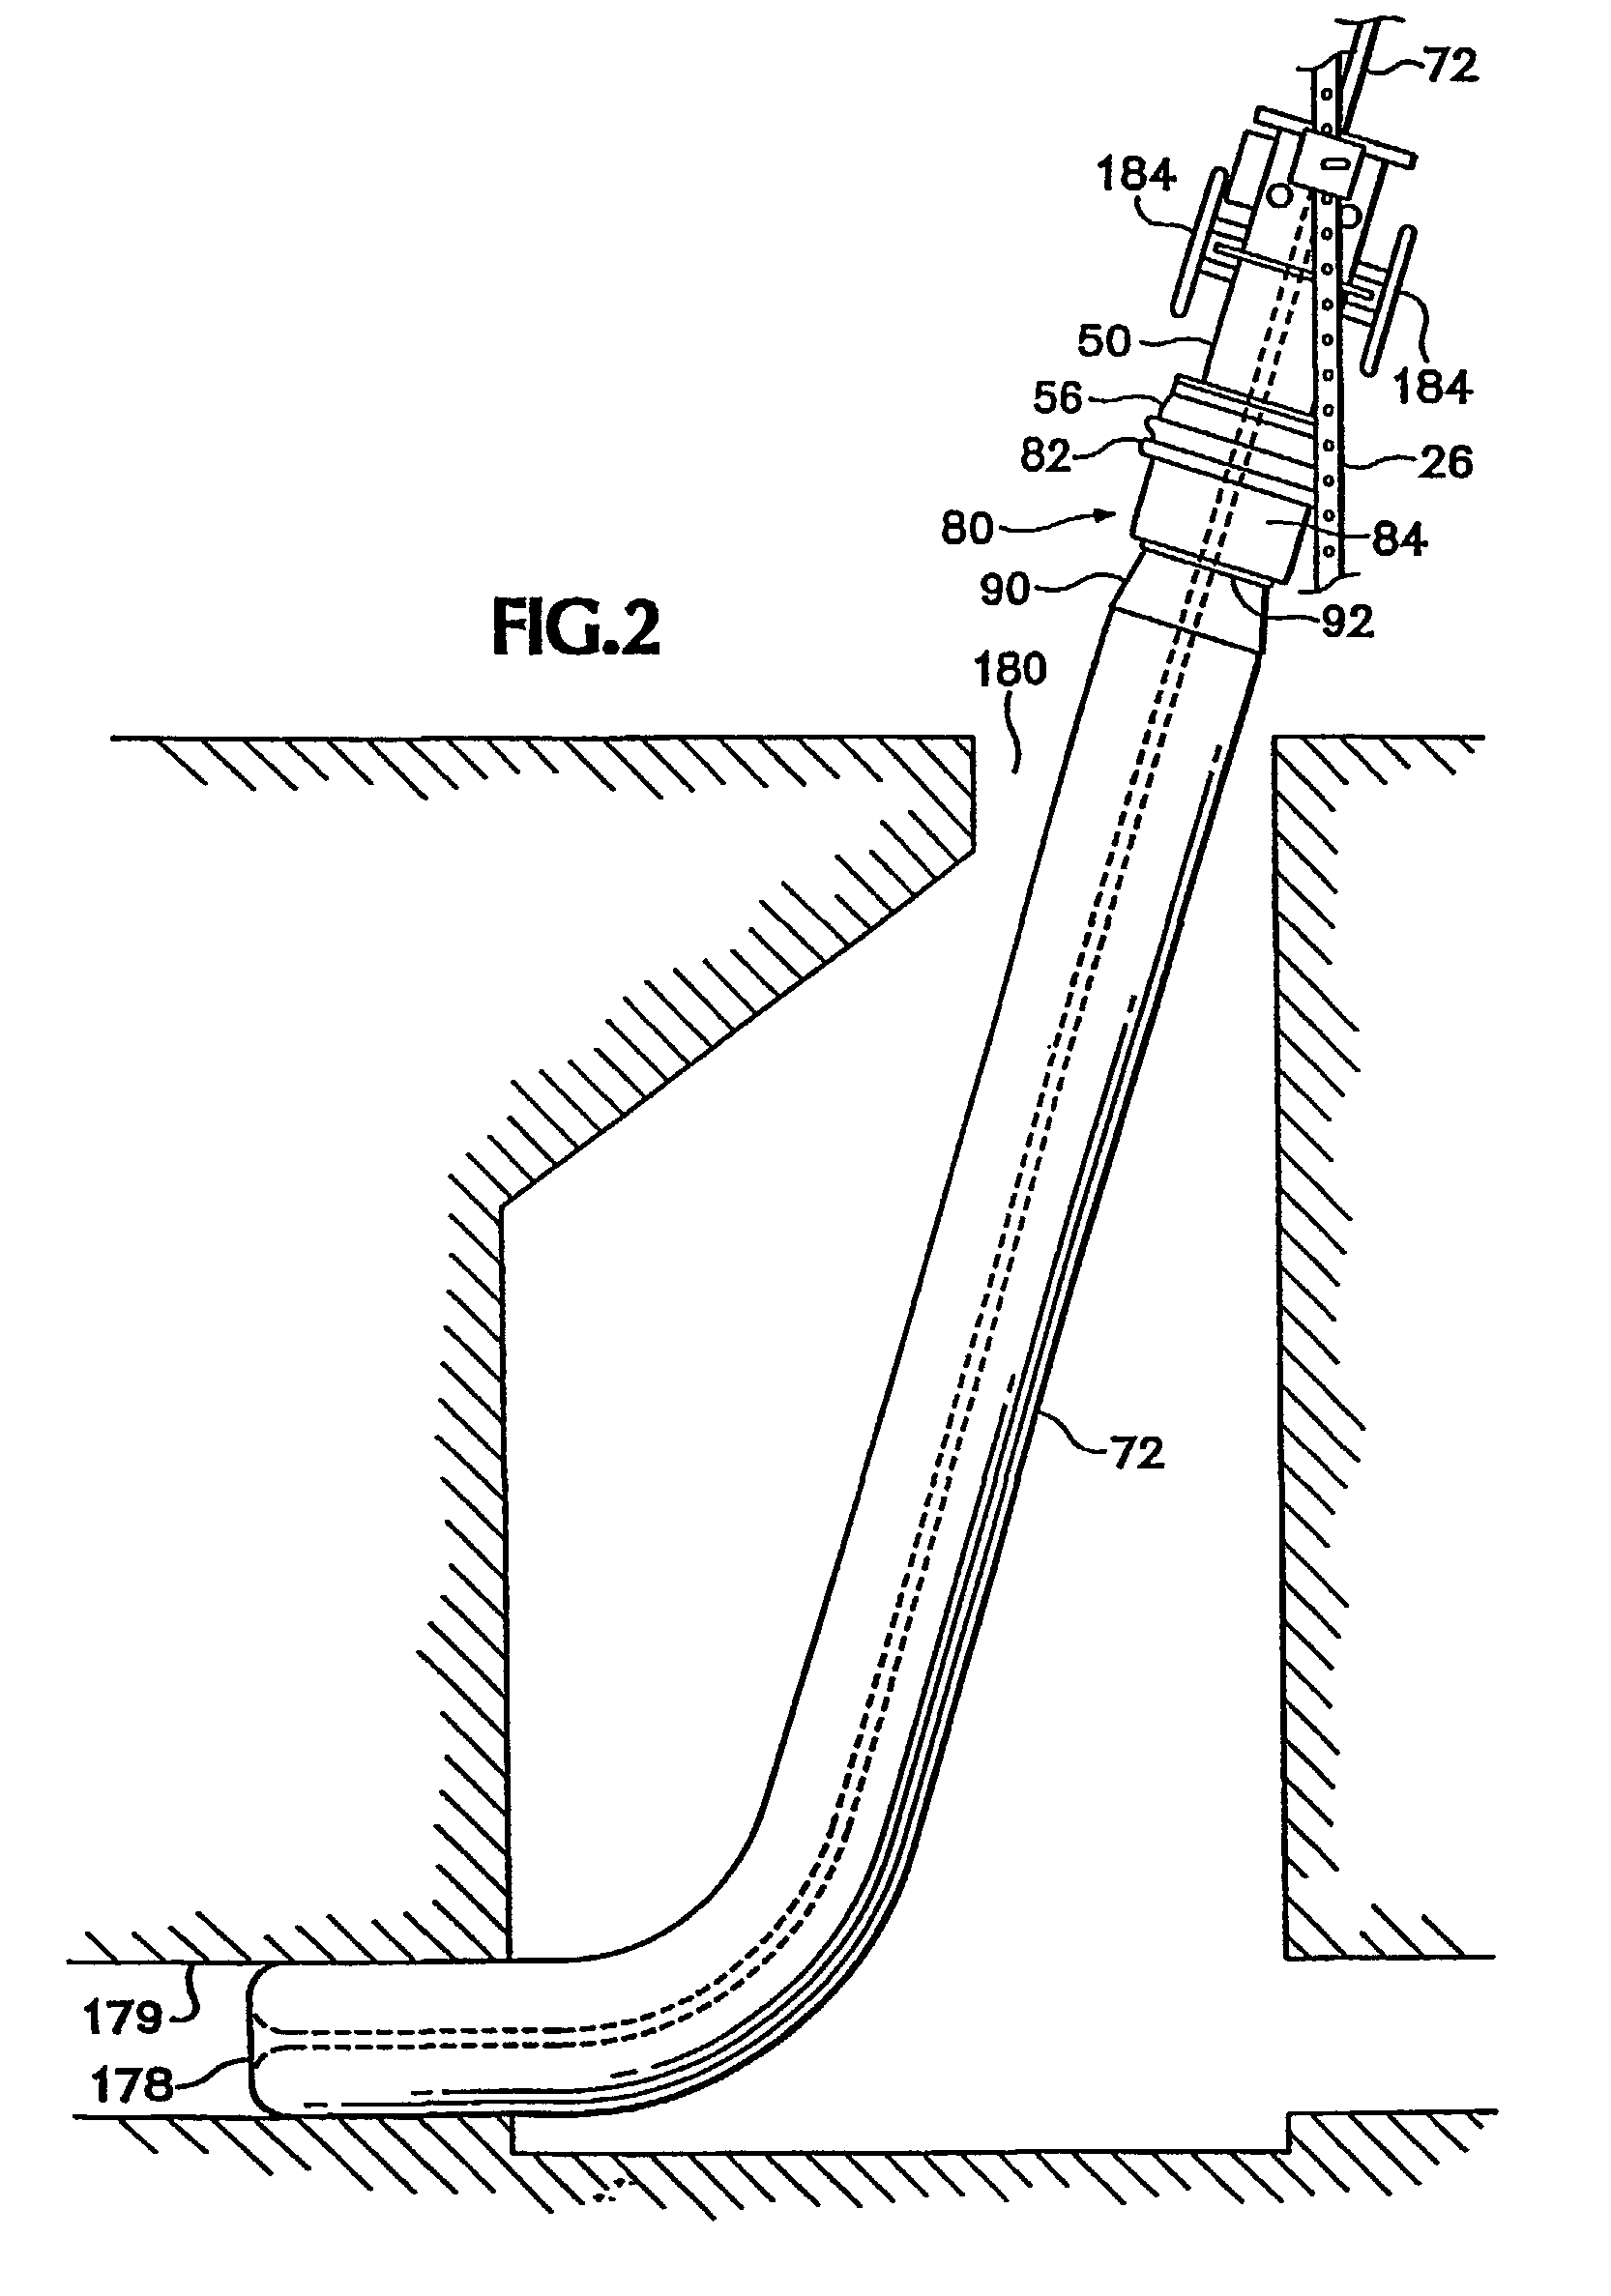 Method and apparatus for installing a flexible tubular liner